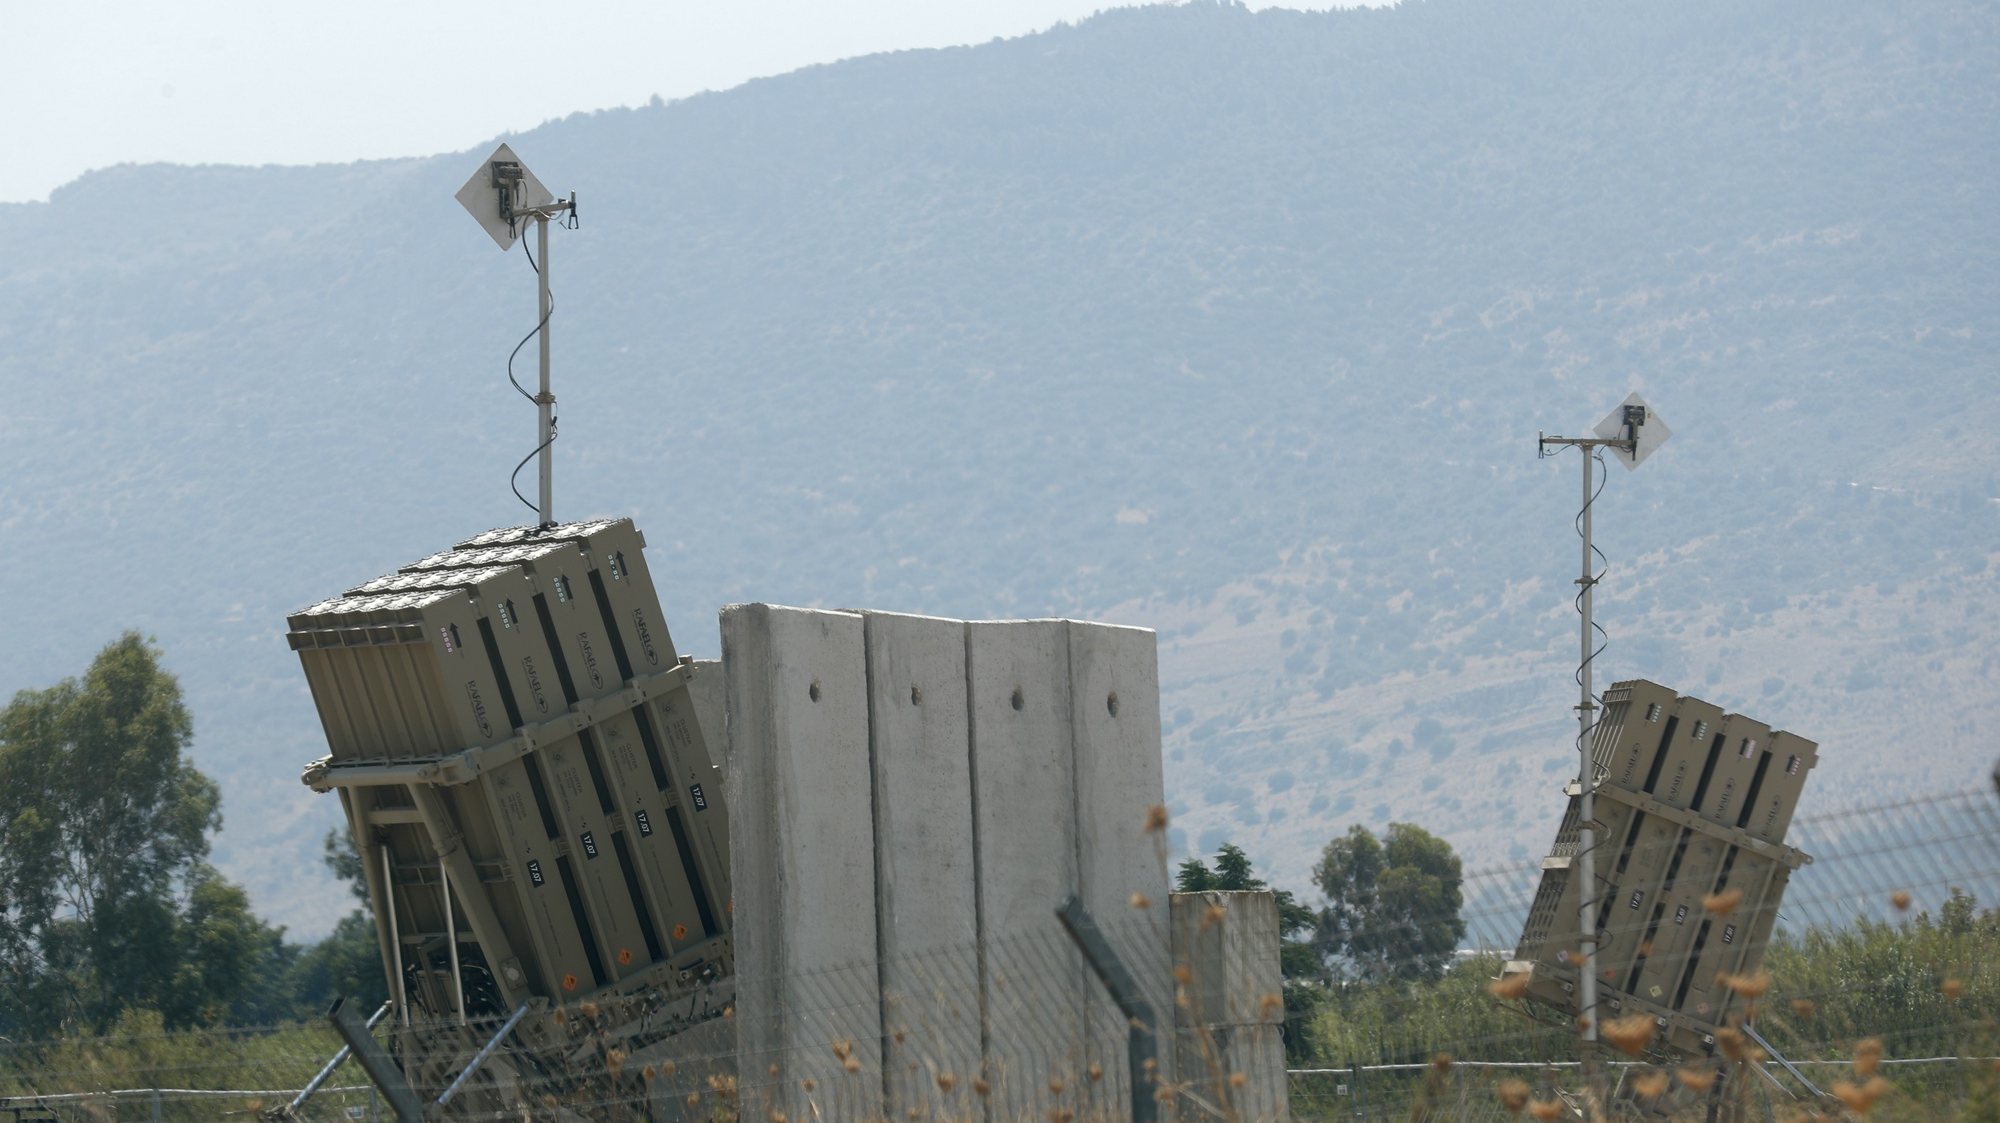 epa09397776 Israeli Iron dome anti-missile battery deployed in the north of Galilee, near the Israeli border with Lebanon 05 August 2021. Tensions continues on the Israeli-Lebanon border after Israeli army responded by artillery and airstrike of Lebanese targets after three rockets were fired from Lebanon into Israeli territory on 04 August.  EPA/ATEF SAFADI